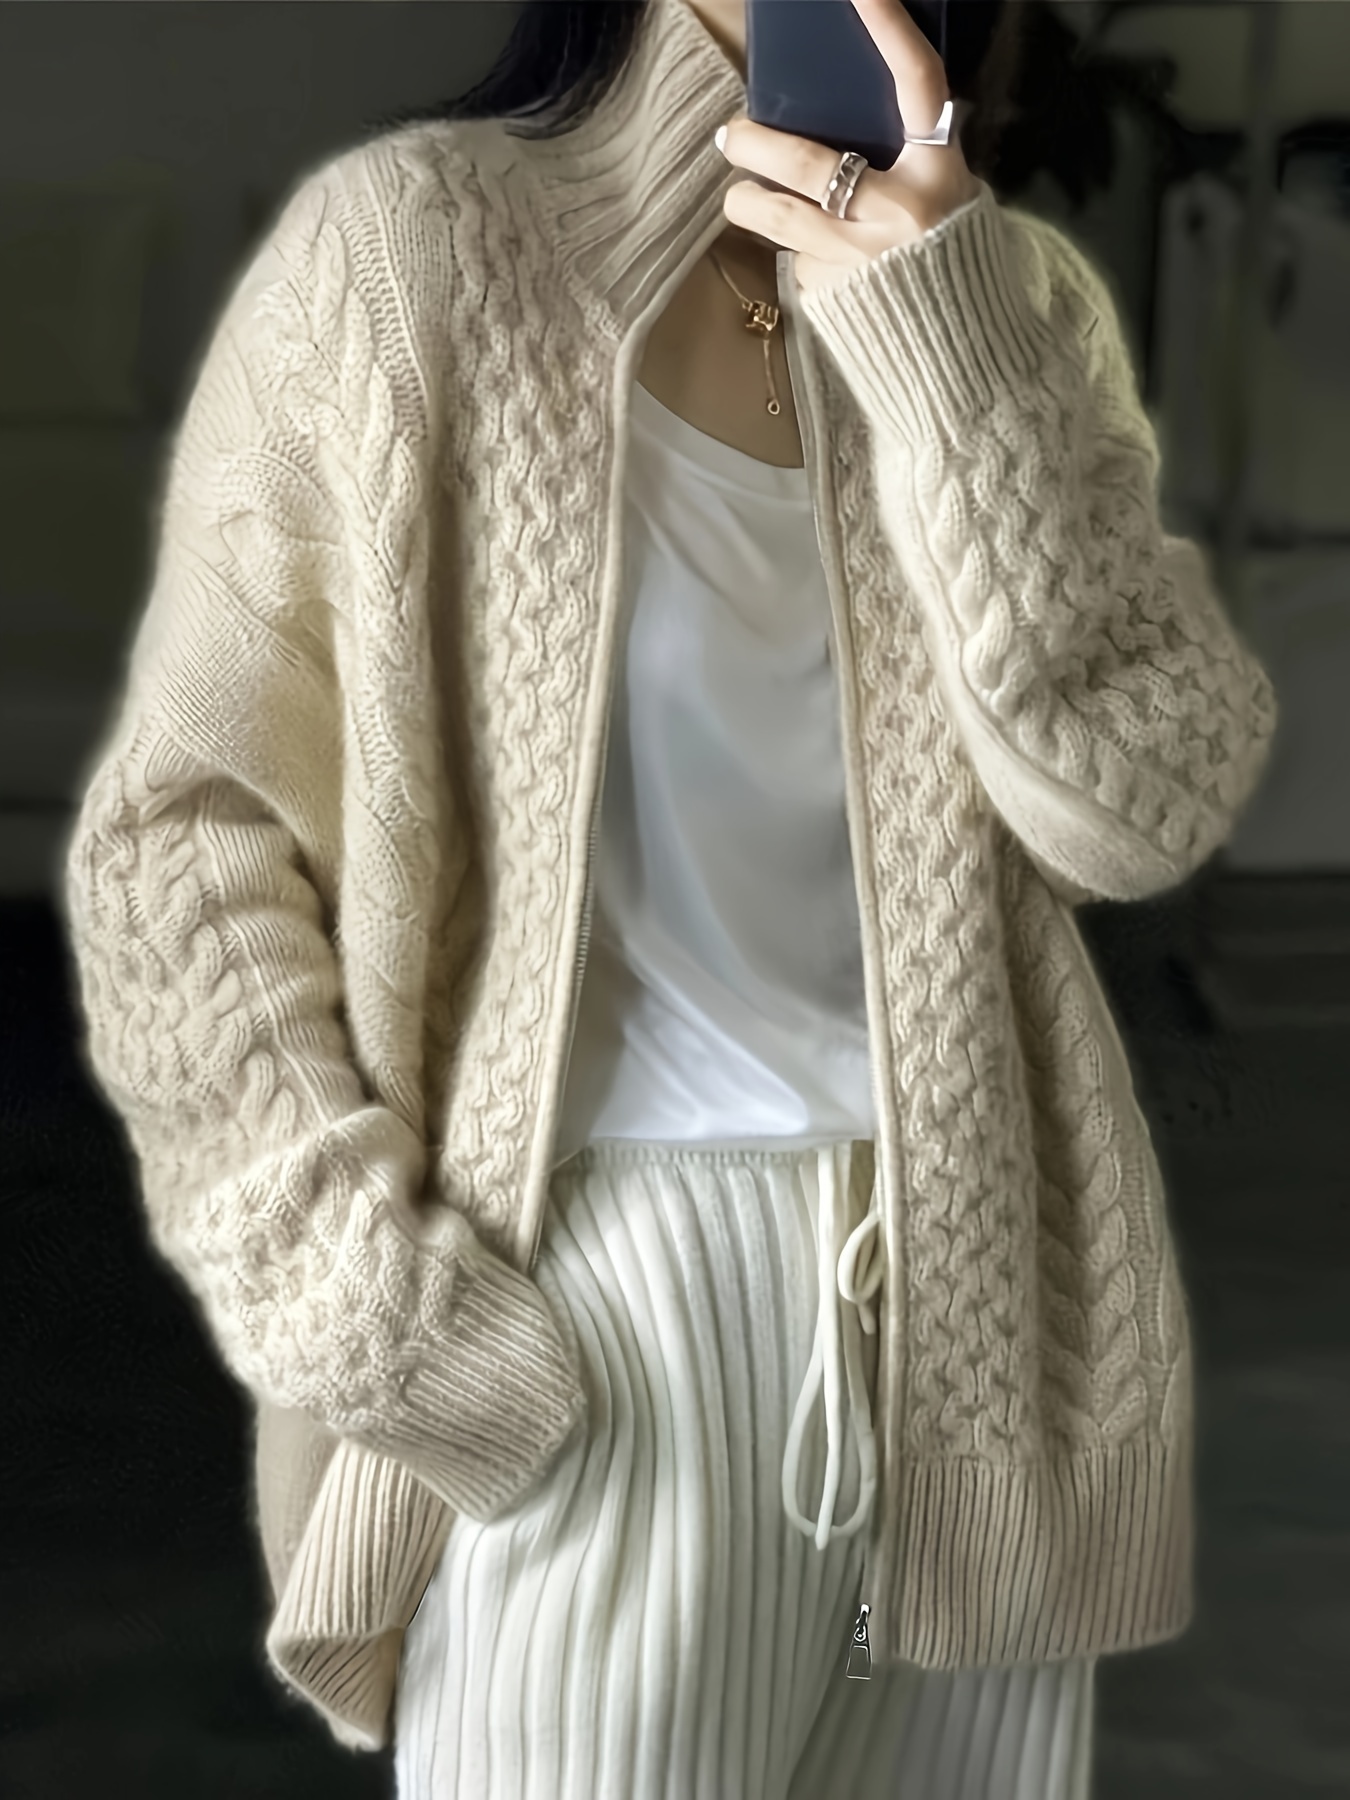 Cable-knit zip-neck sweater